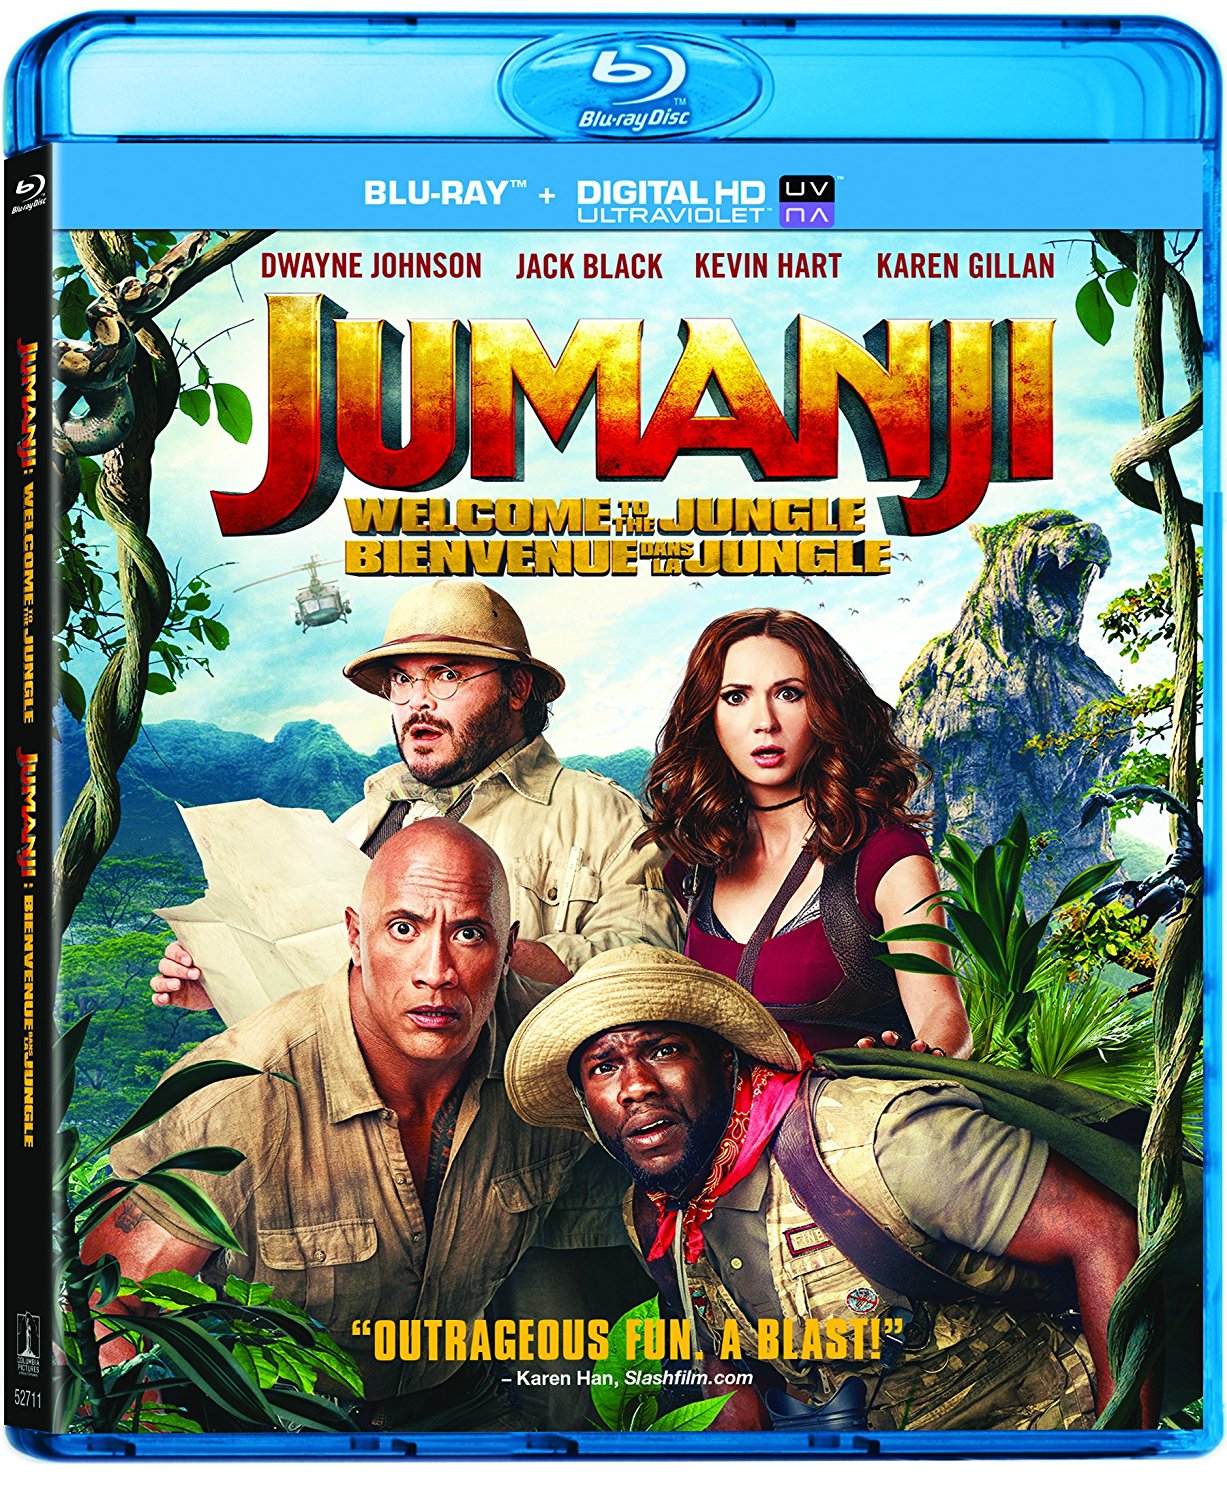 Jumanji: Welcome to the Jungle : BR only.